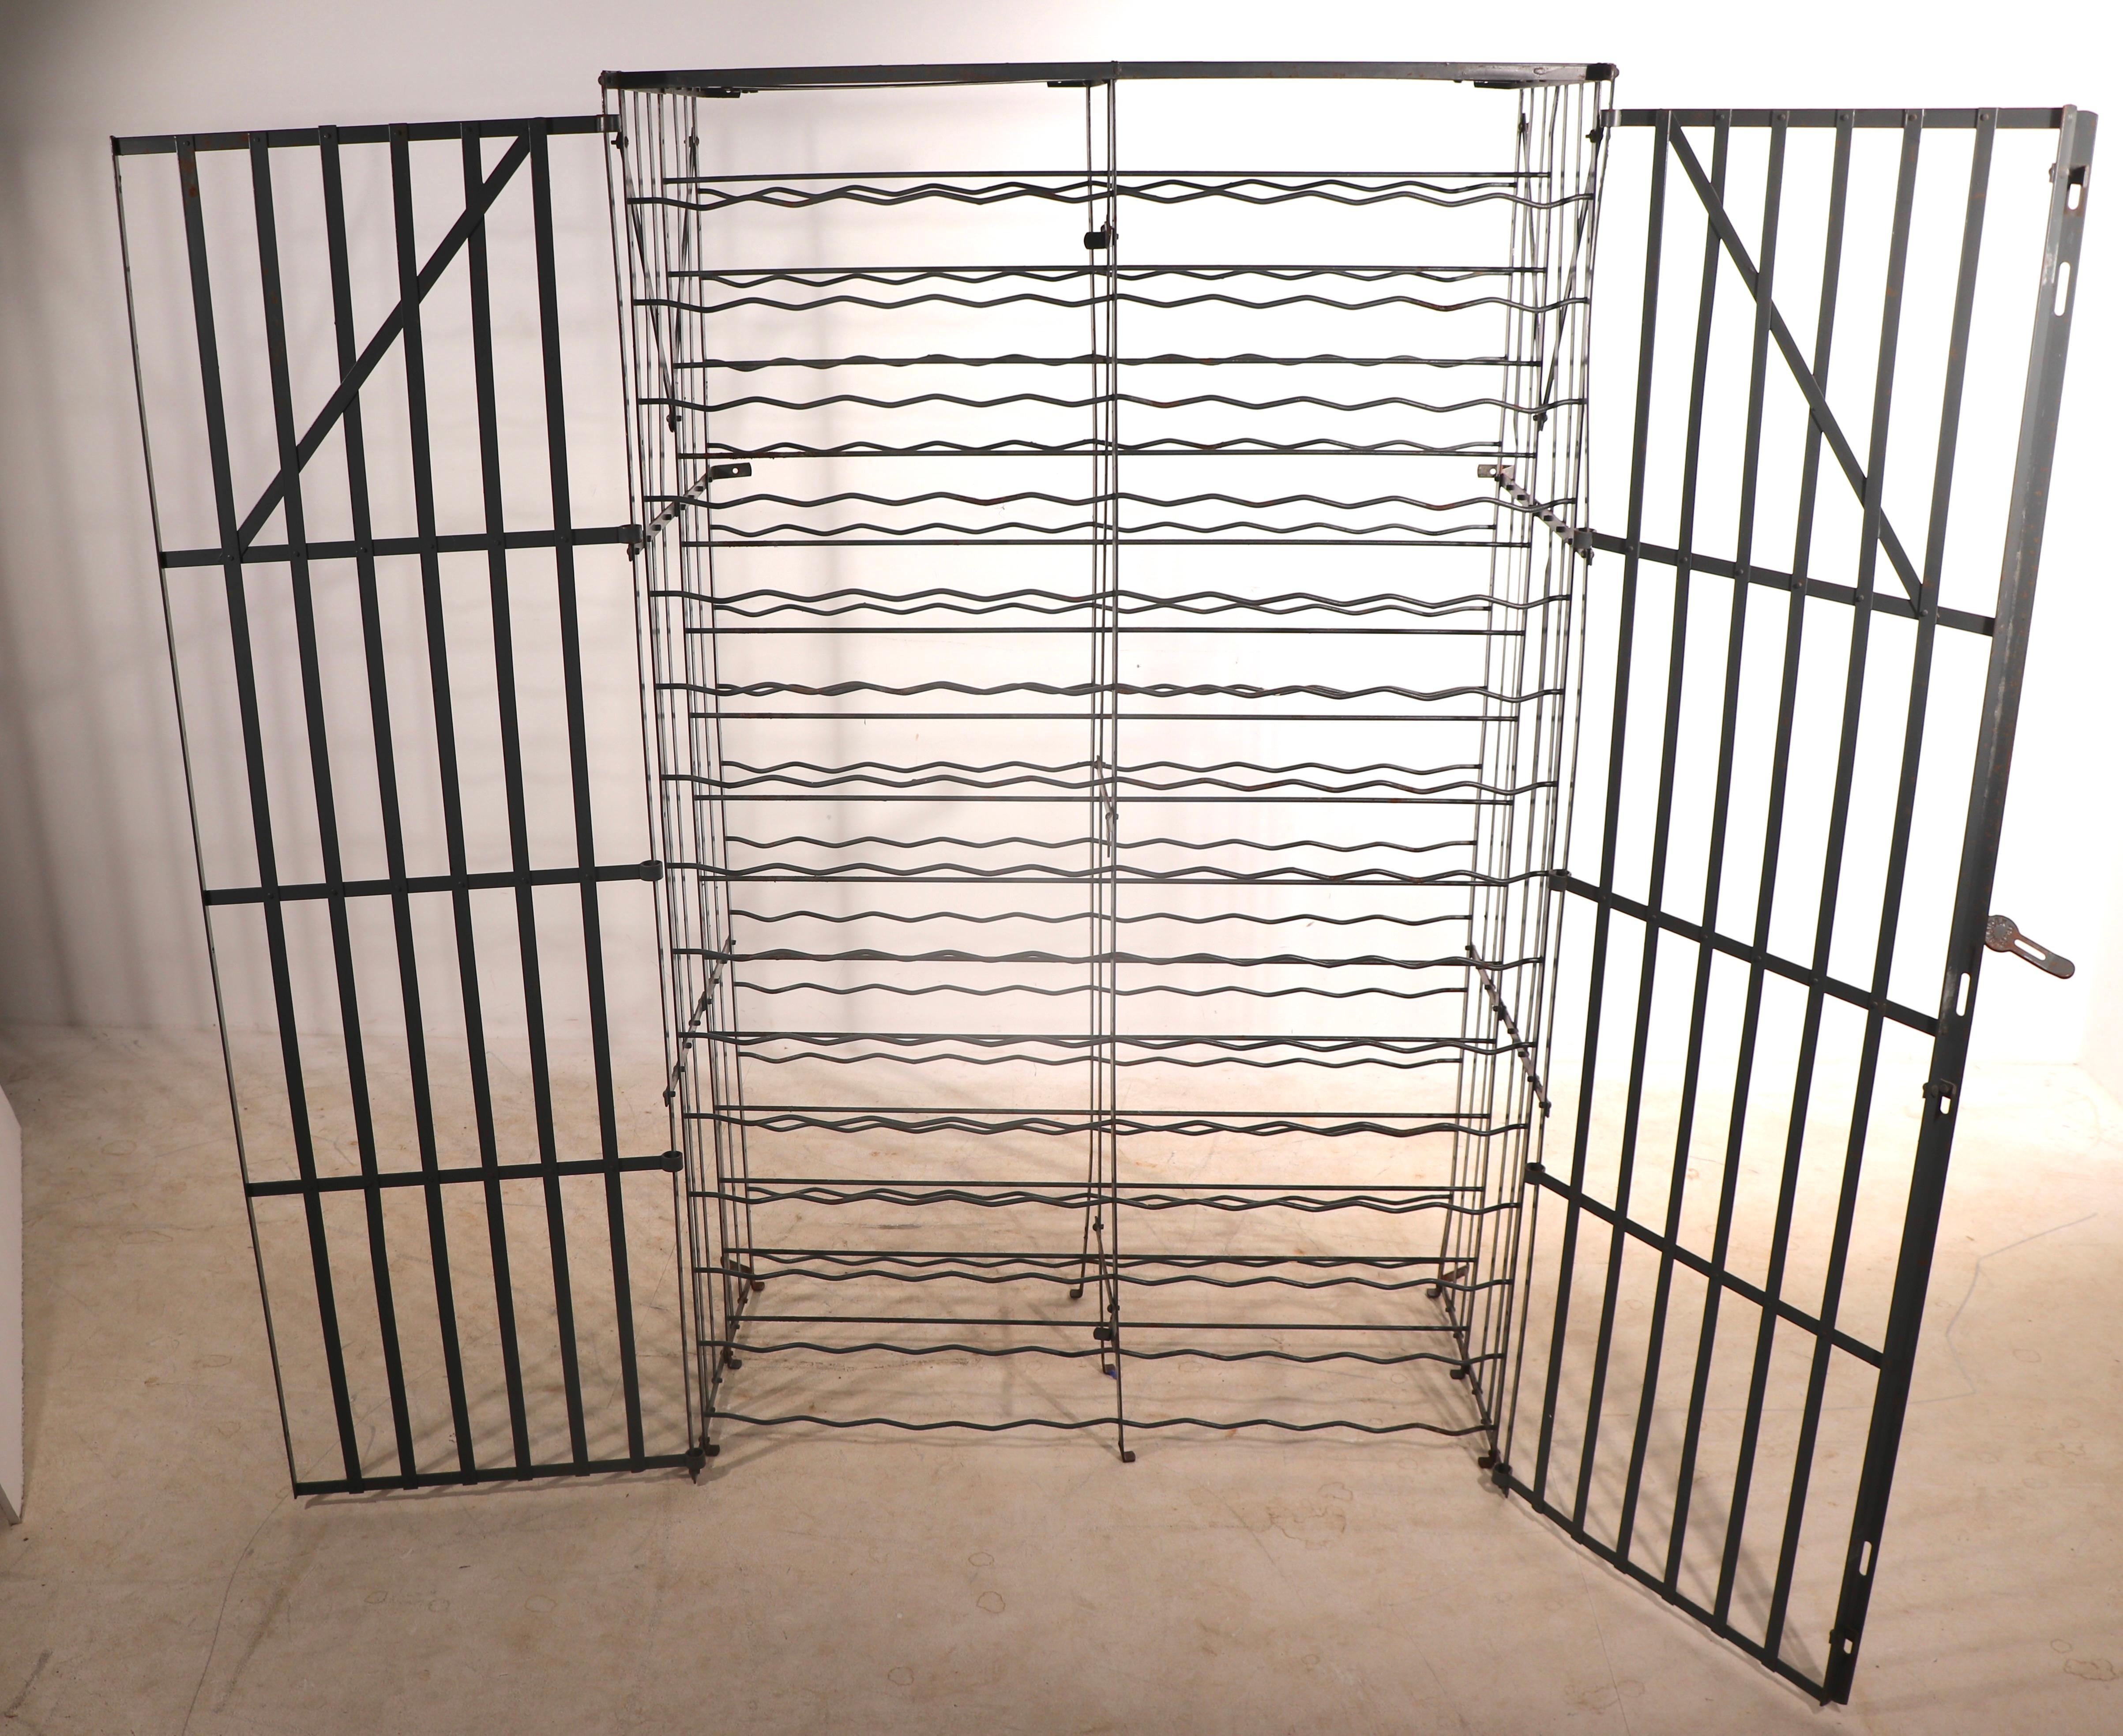 Spectacular double door steel cage wine rack,  Made in France by Rigidex. This example holds up to 300 bottles, making it suitable for both commercial and serious wine enthusiasts. The cage structure can free stand, or be attached to a wall for